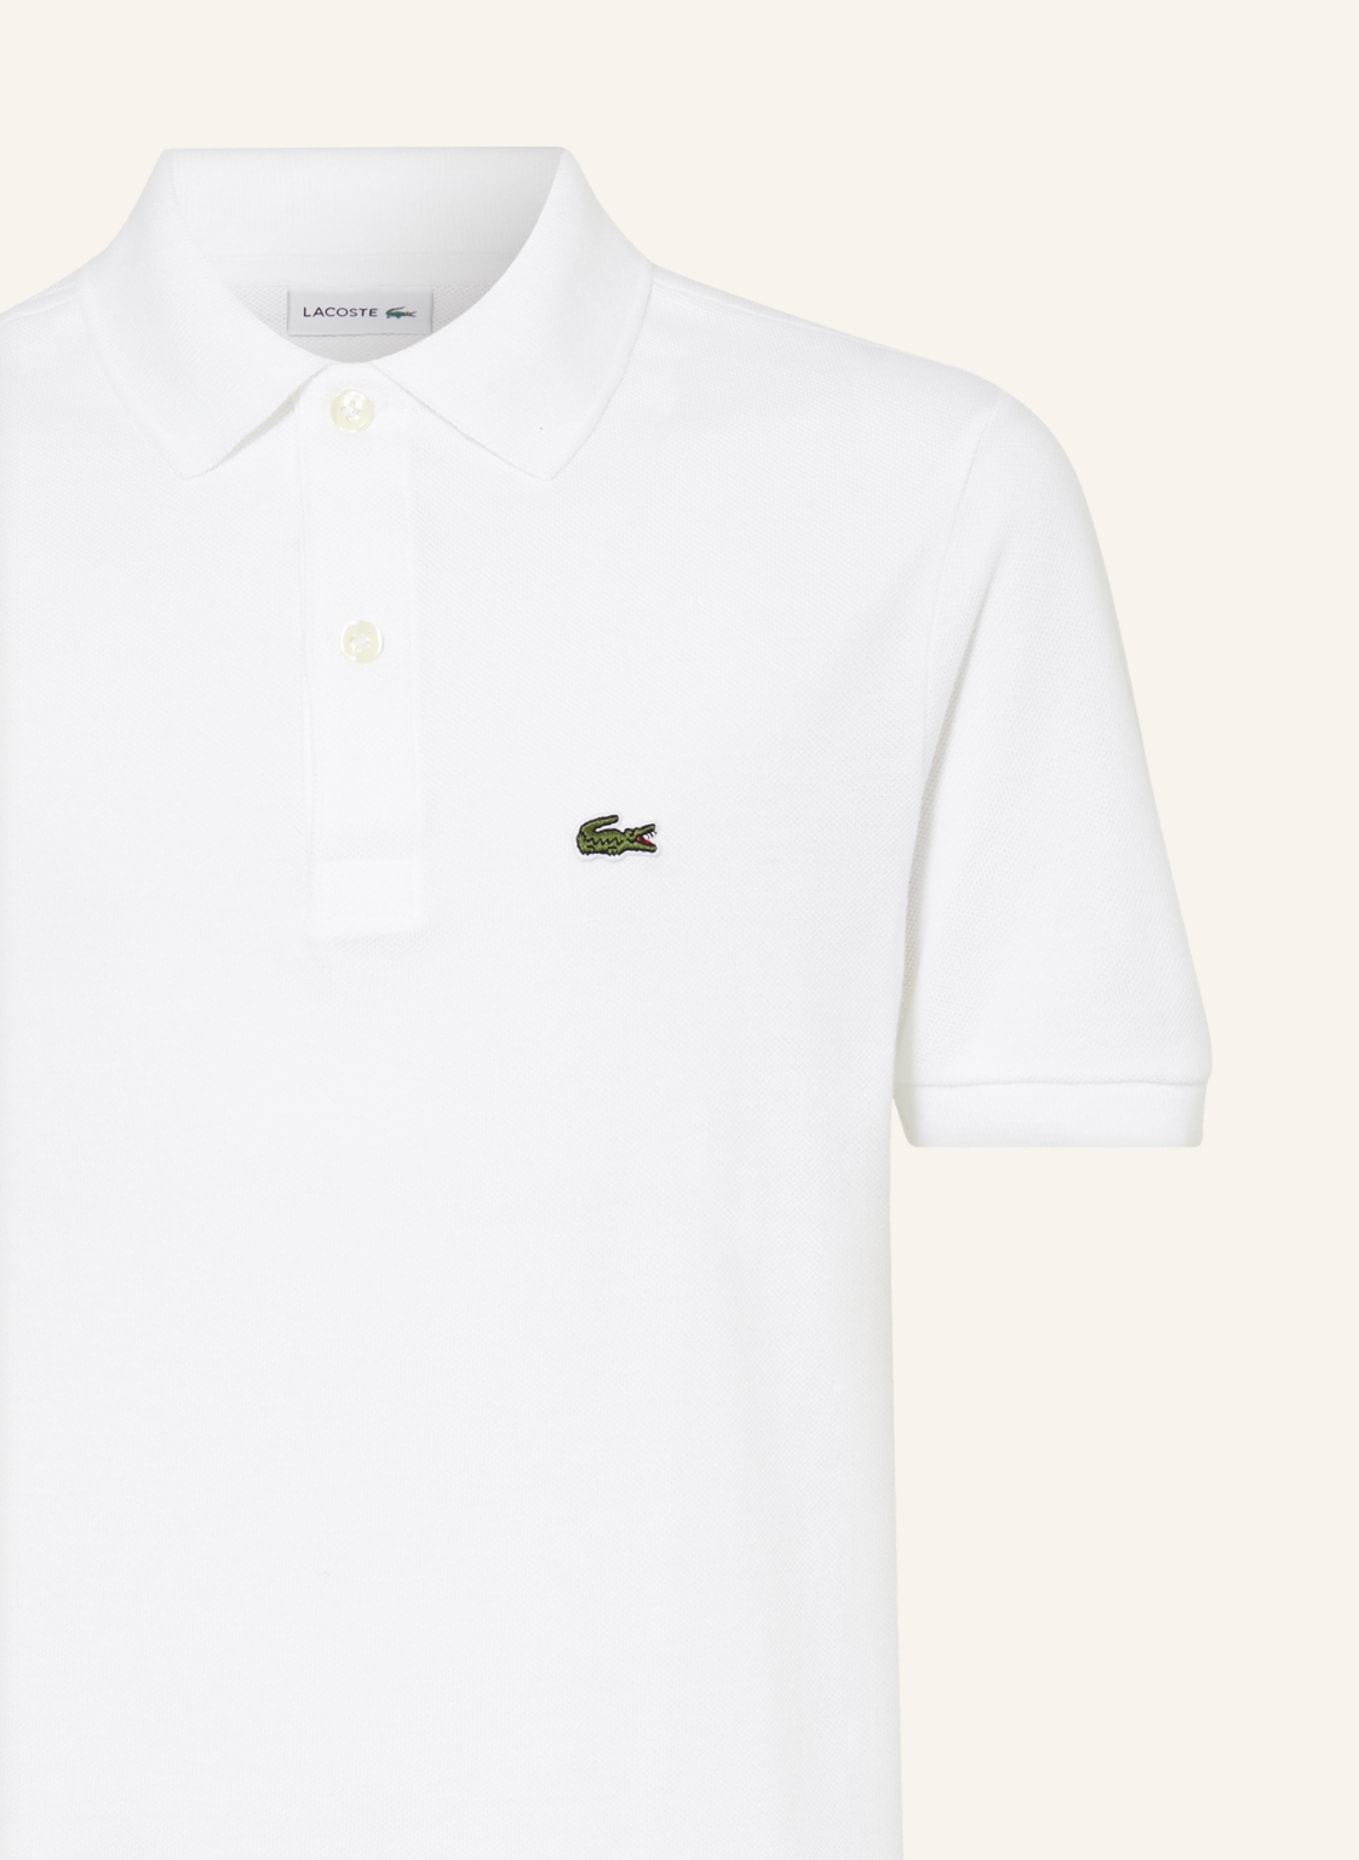 LACOSTE Piqué-Poloshirt in weiss | Poloshirts